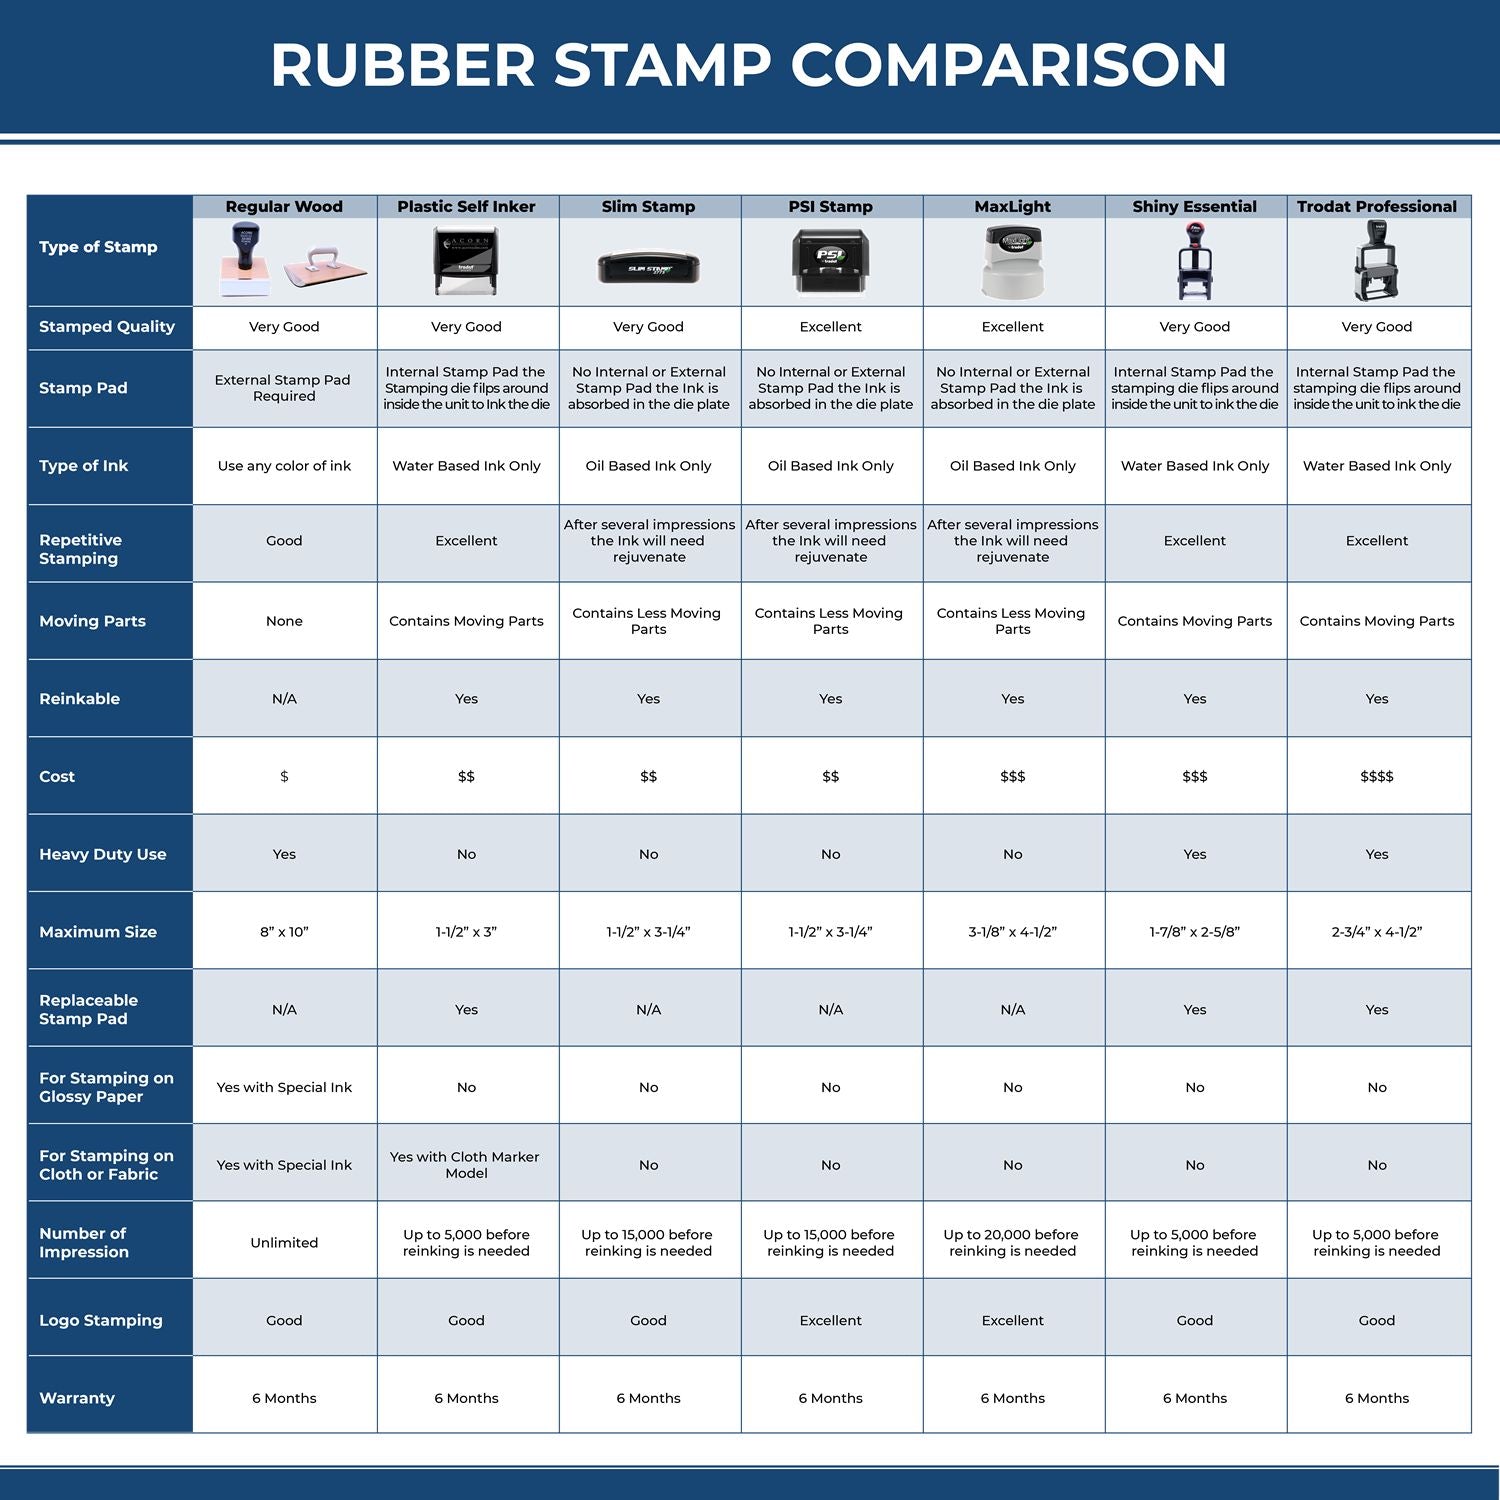 A comparison chart for the different types of mount models available for the Nevada Professional Engineer Seal Stamp.